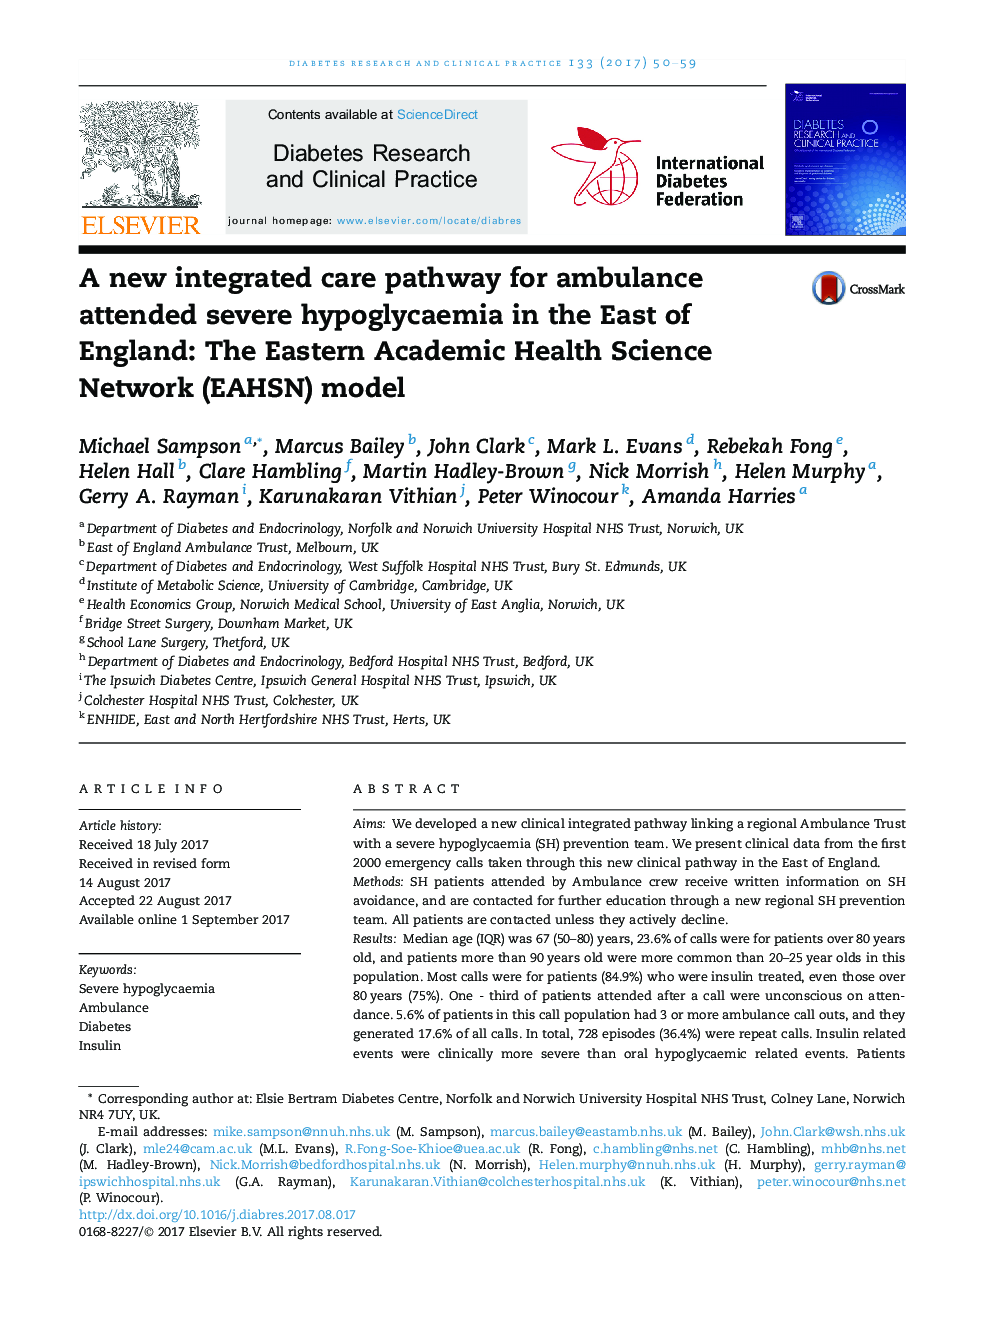 A new integrated care pathway for ambulance attended severe hypoglycaemia in the East of England: The Eastern Academic Health Science Network (EAHSN) model